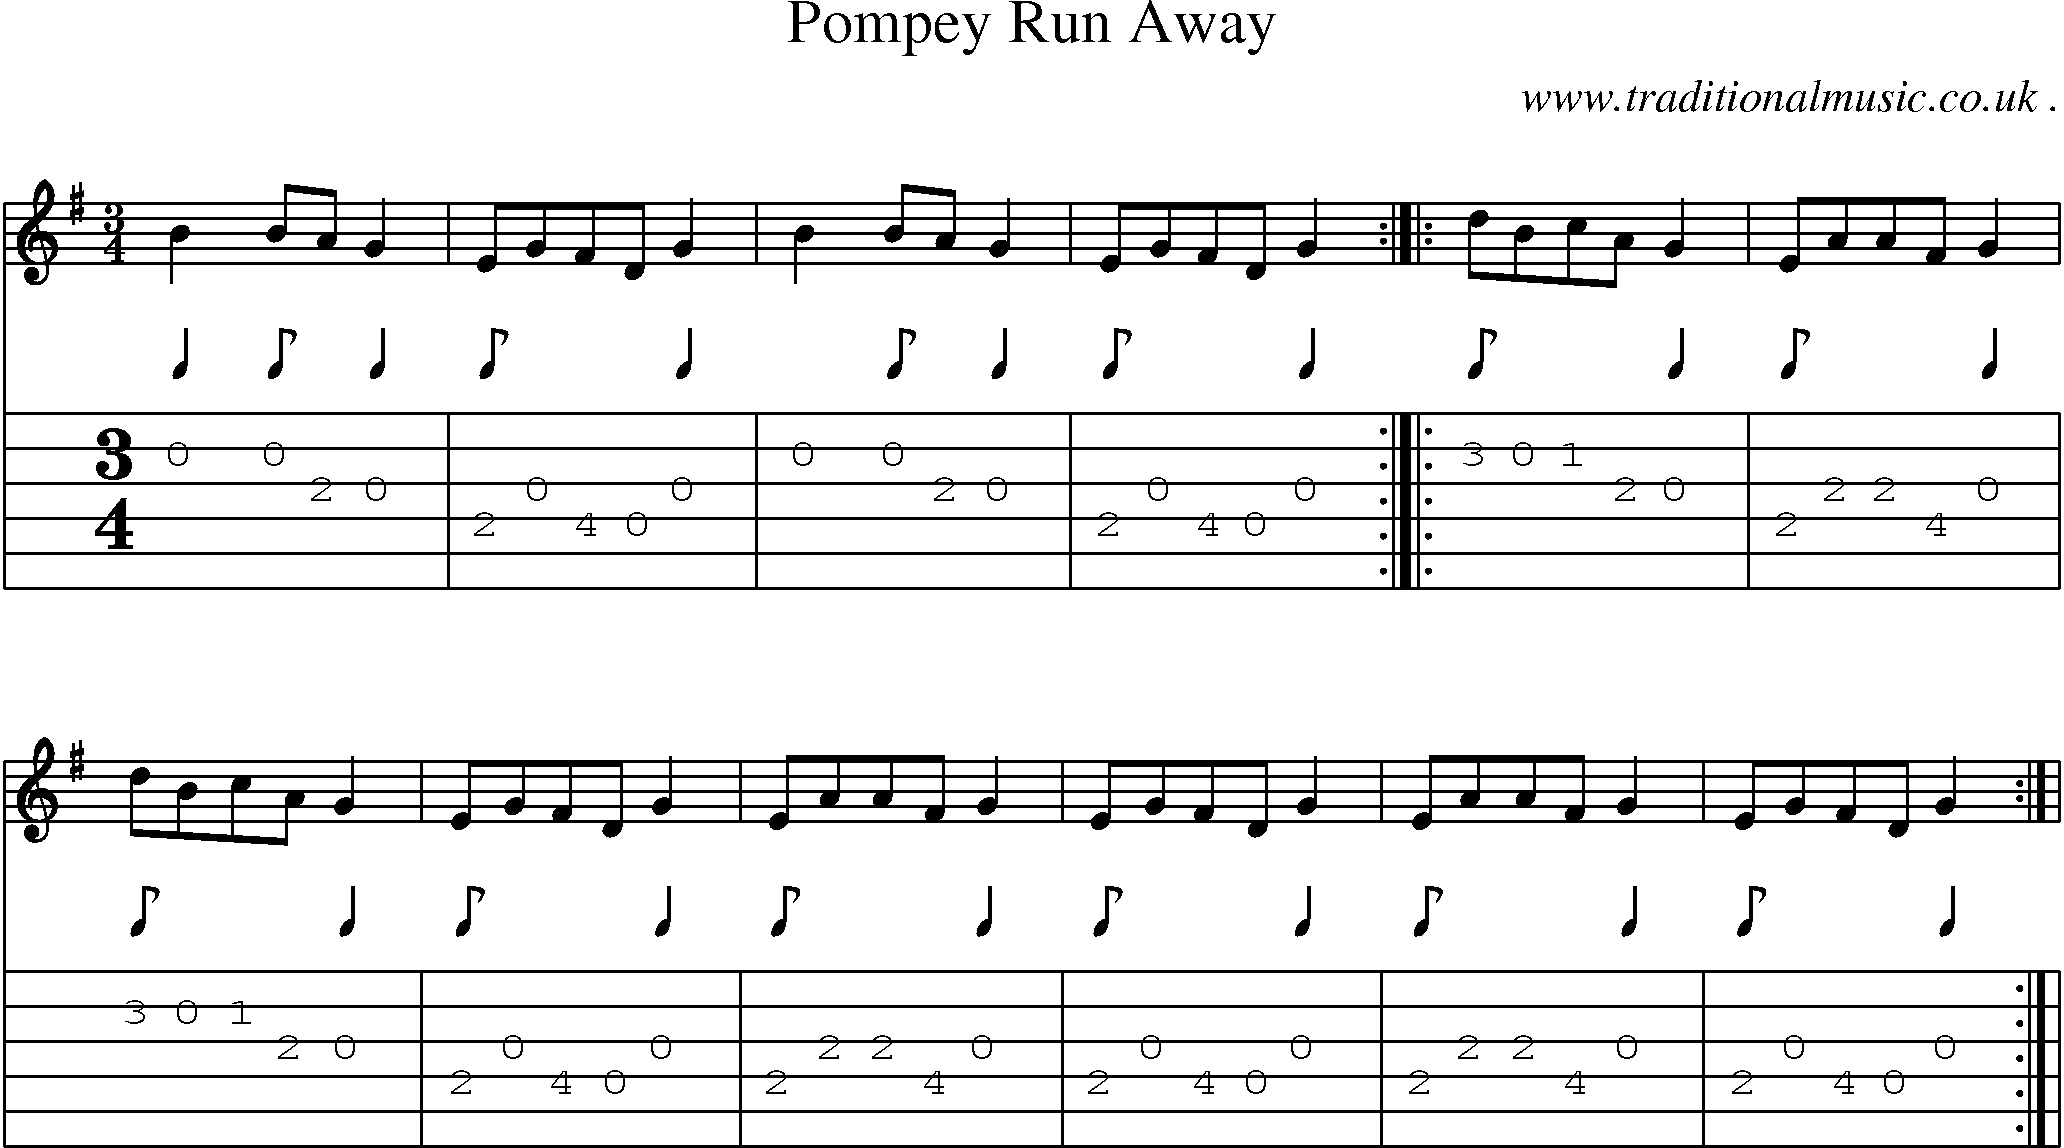 Sheet-Music and Guitar Tabs for Pompey Run Away